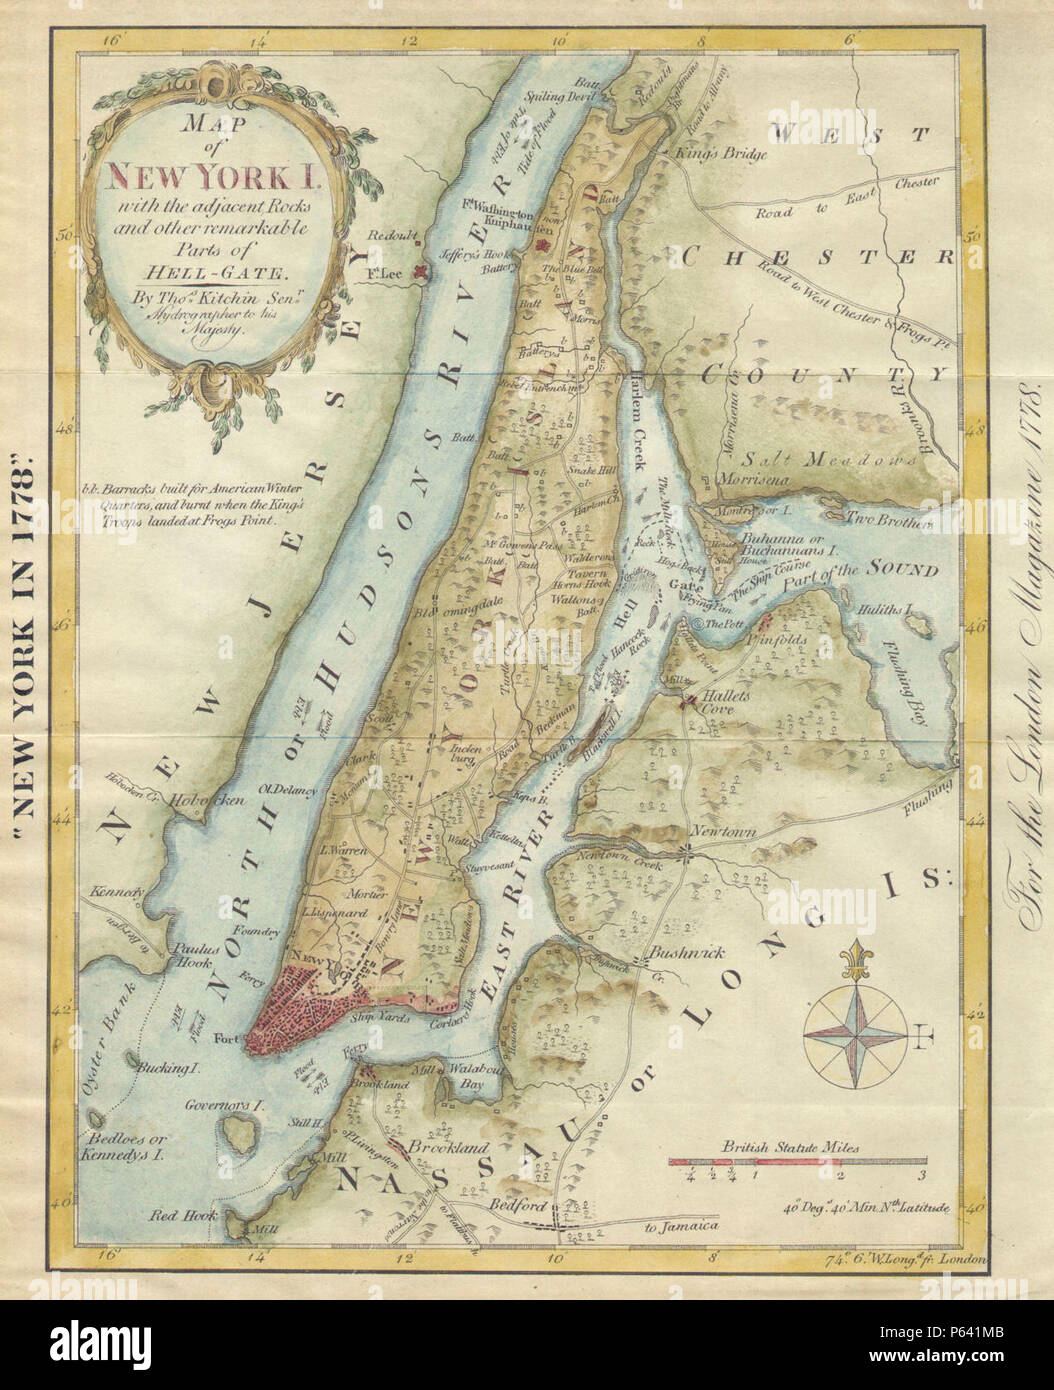 1869 Kitchen - Shannon Map of New York City - Geographicus - NewYorkKitchin-mcny-1869. Stock Photo